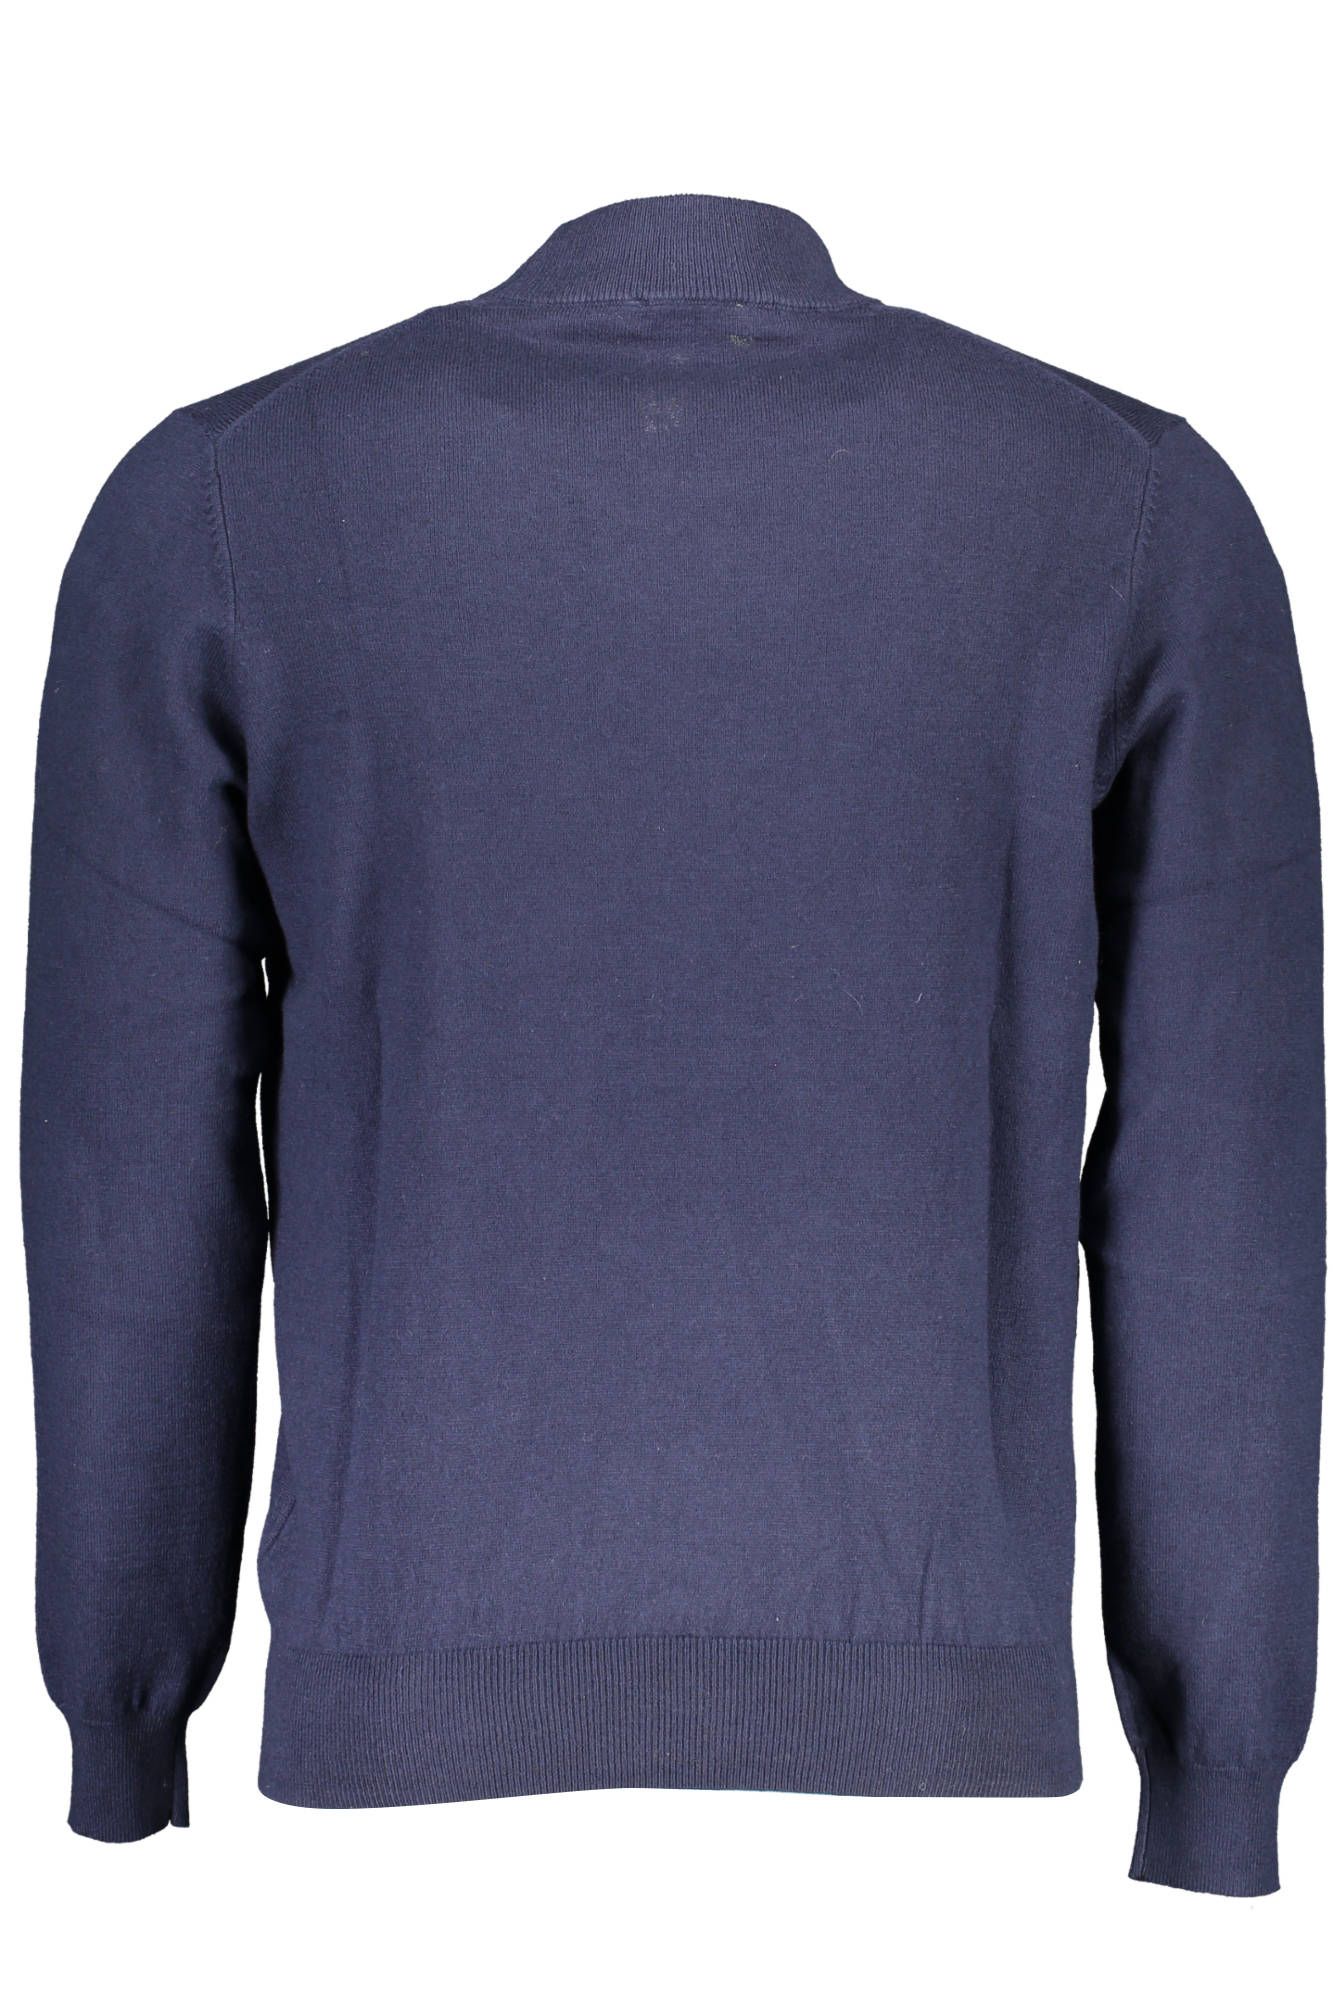 North Sails Eco-Conscious Turtleneck Sweater in Blue